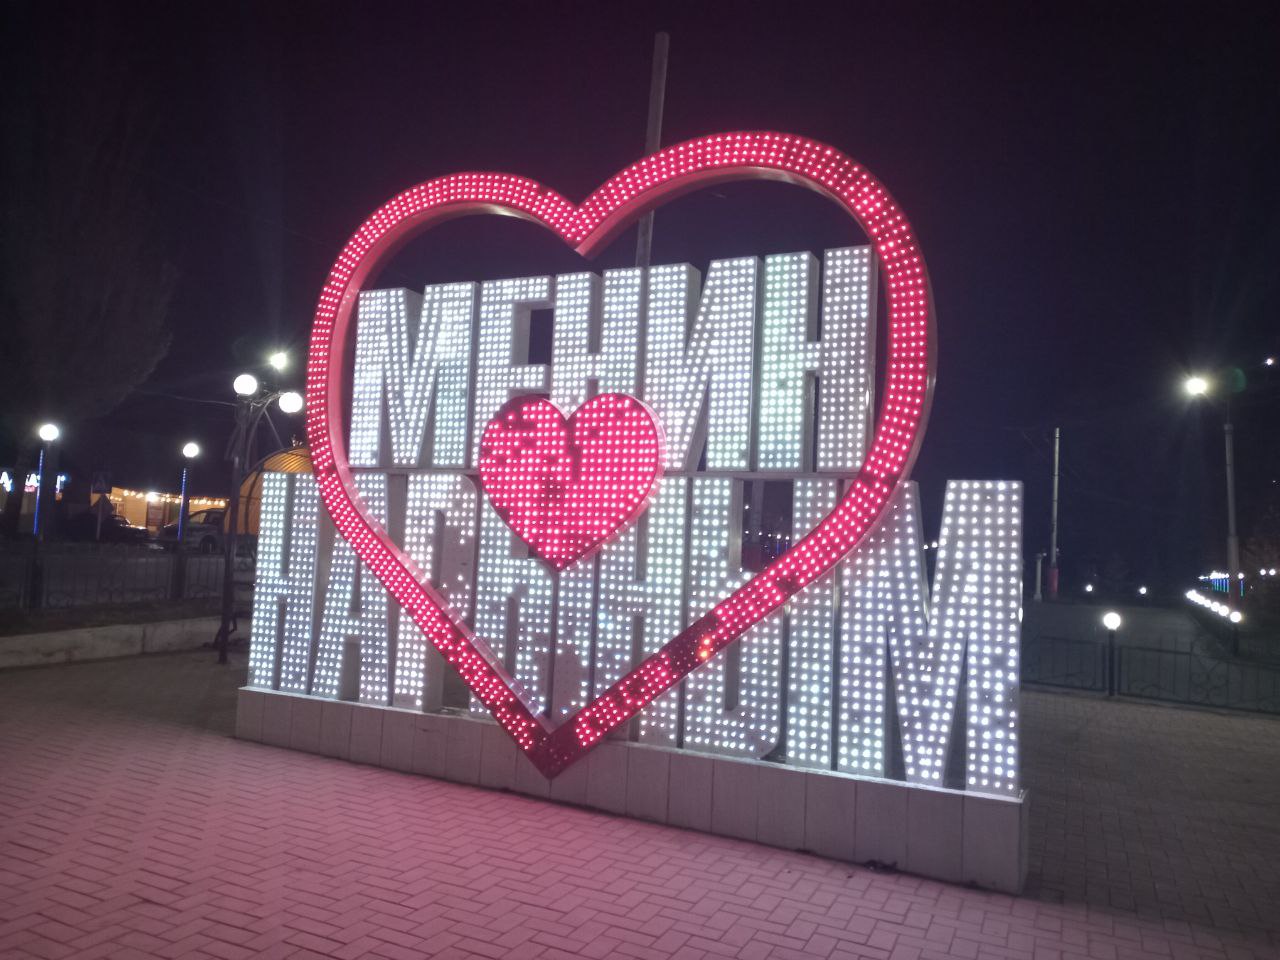 a standing, illuminated sign with a red heart surrounding white text which says, "My Naryn" in Kyrgyz in a small city in the evening